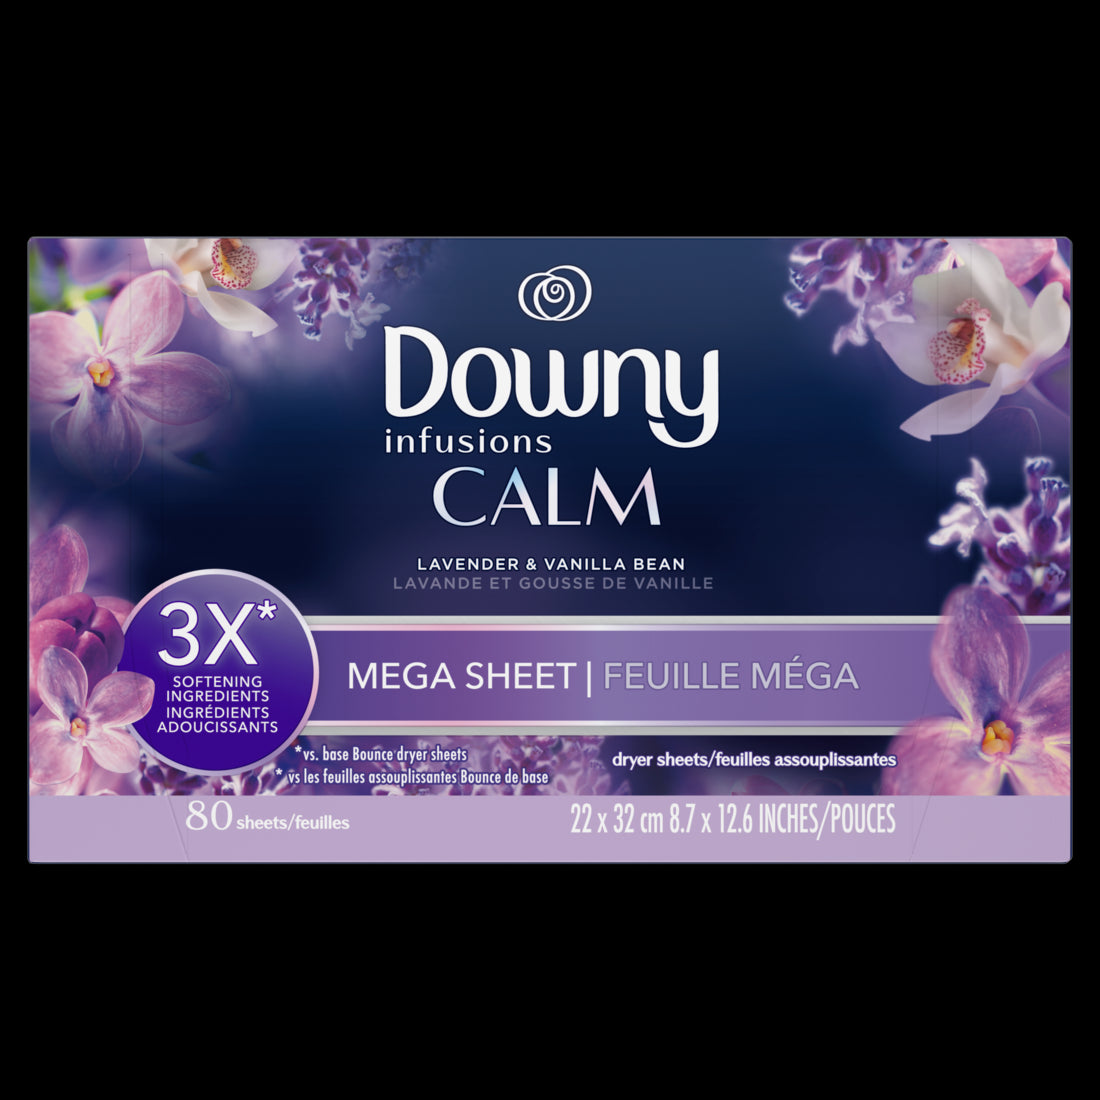 Downy Infusions Mega Dryer Sheets Laundry Fabric Softener CALM Lavender and Vanilla Bean-80ct/4pk